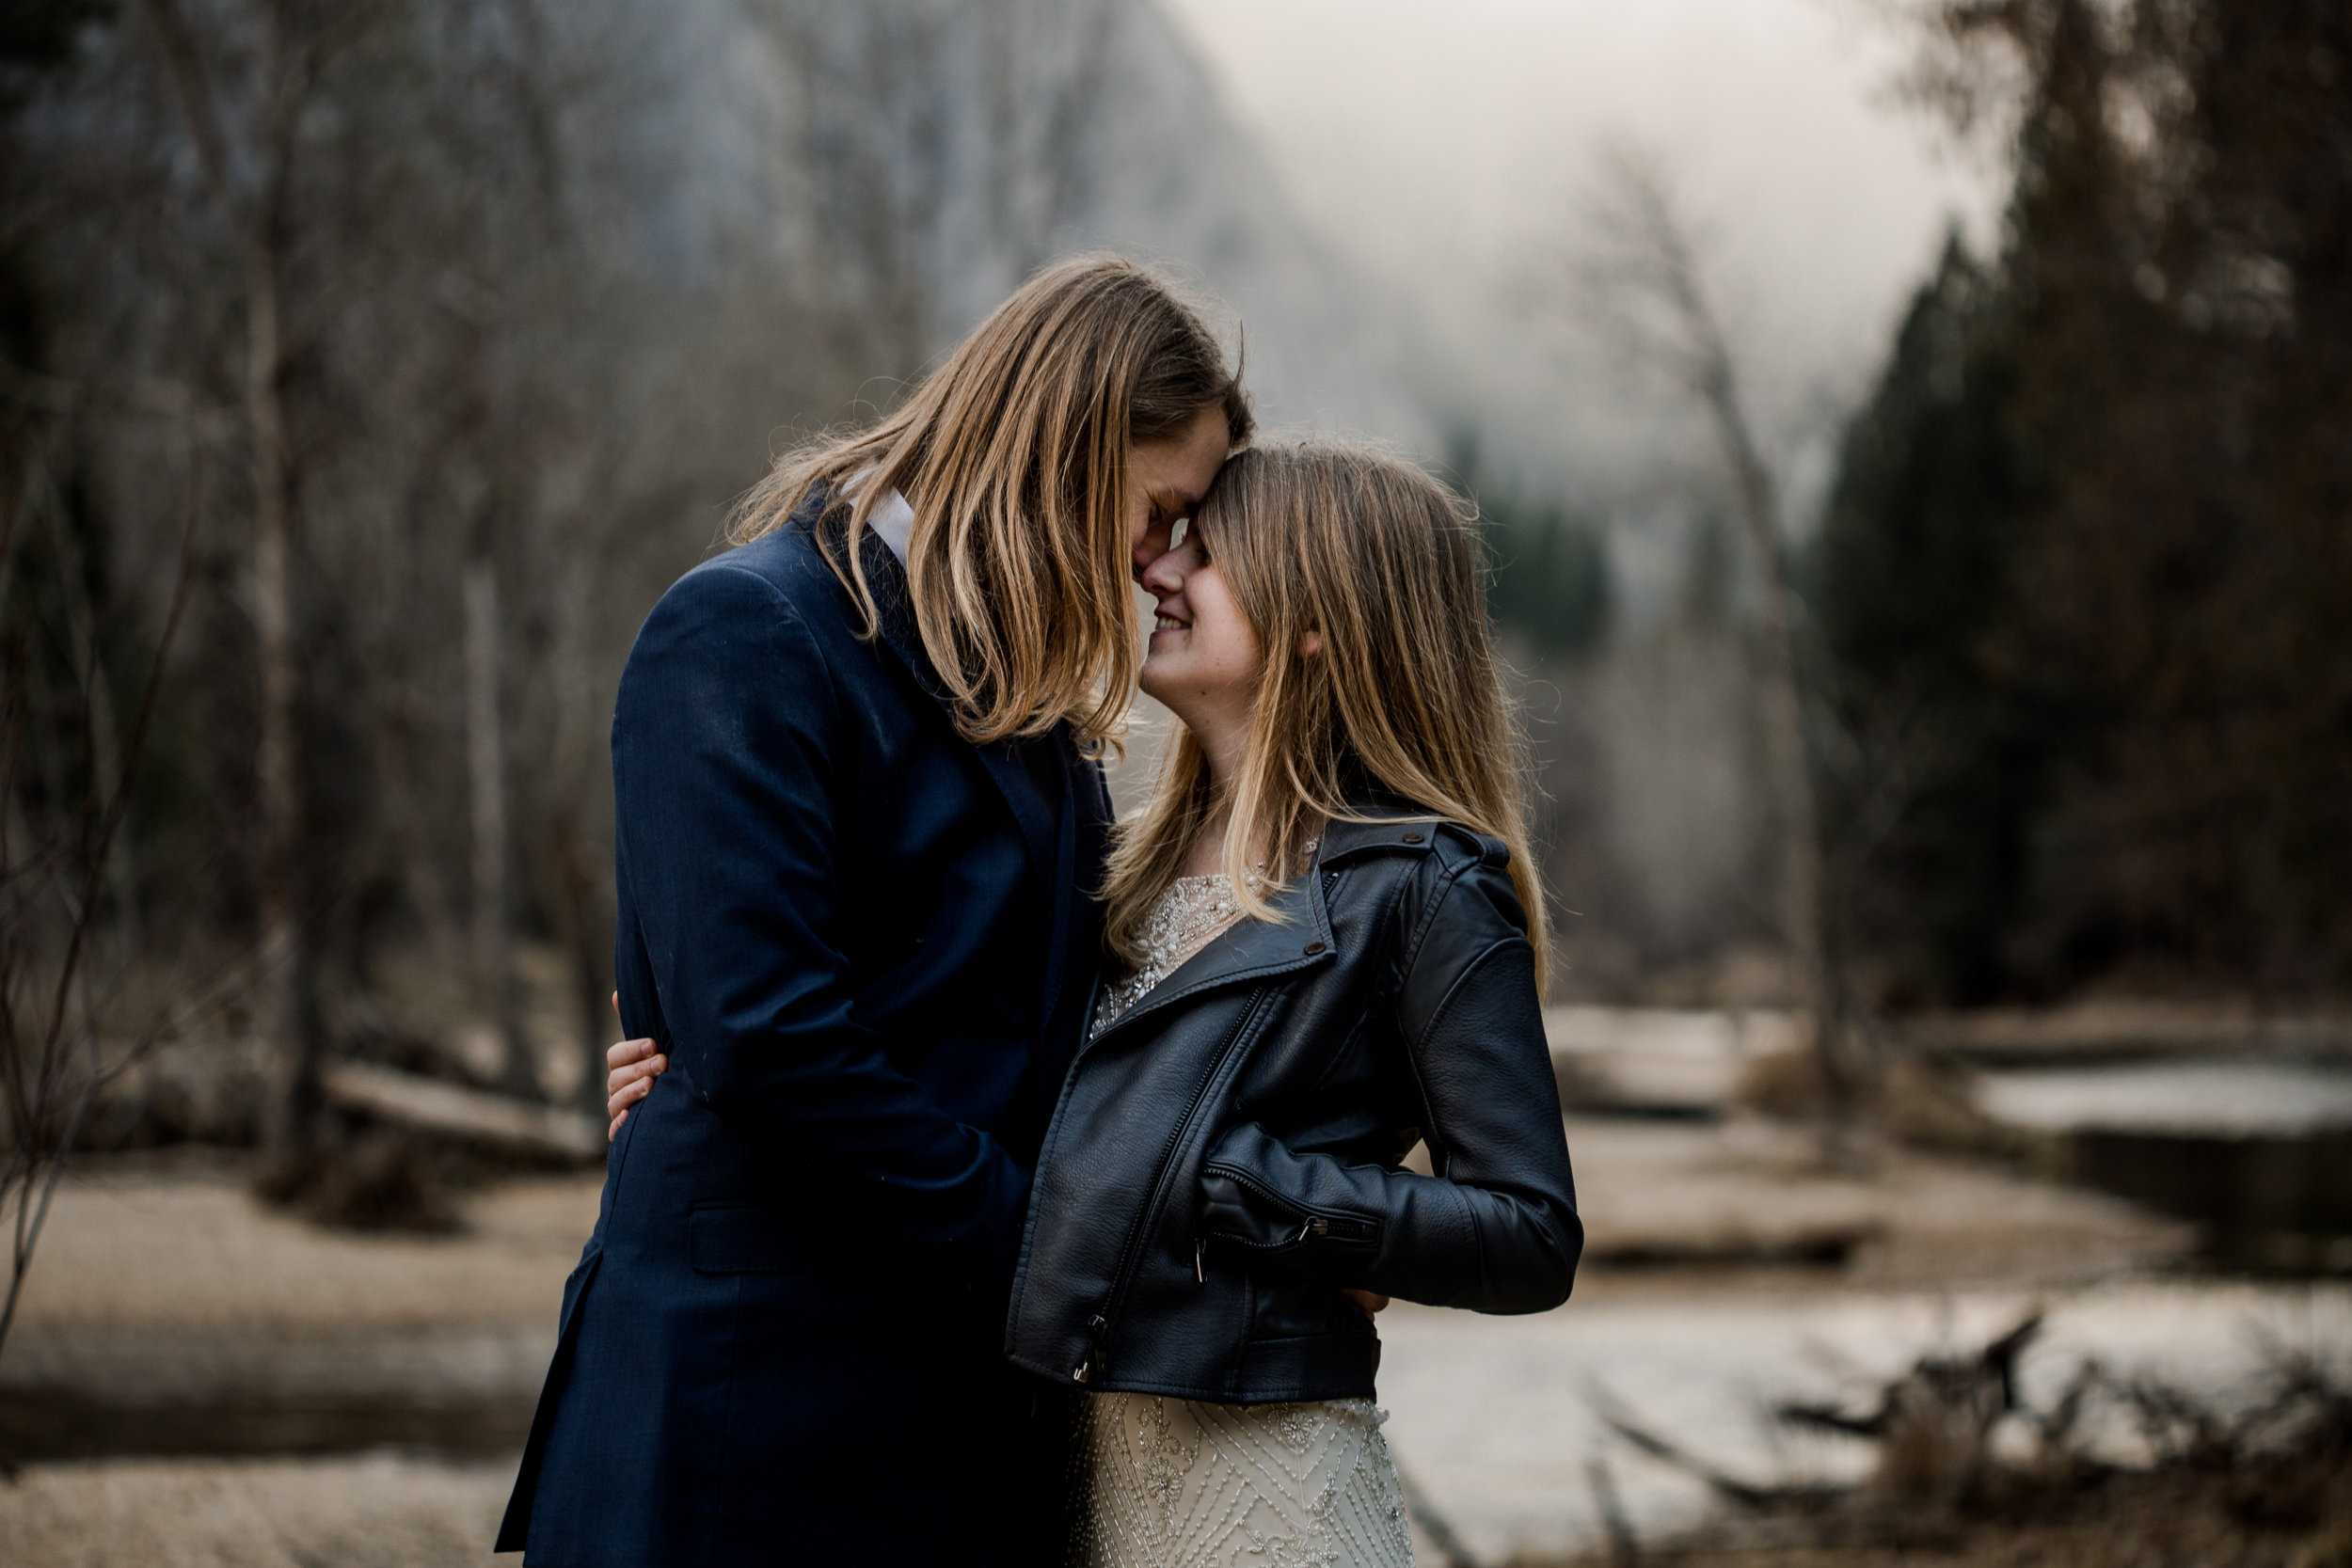 nicole-daacke-photography-yousemite-national-park-elopement-photographer-winter-cloud-moody-elope-inspiration-yosemite-valley-tunnel-view-winter-cloud-fog-weather-wedding-photos-49.jpg